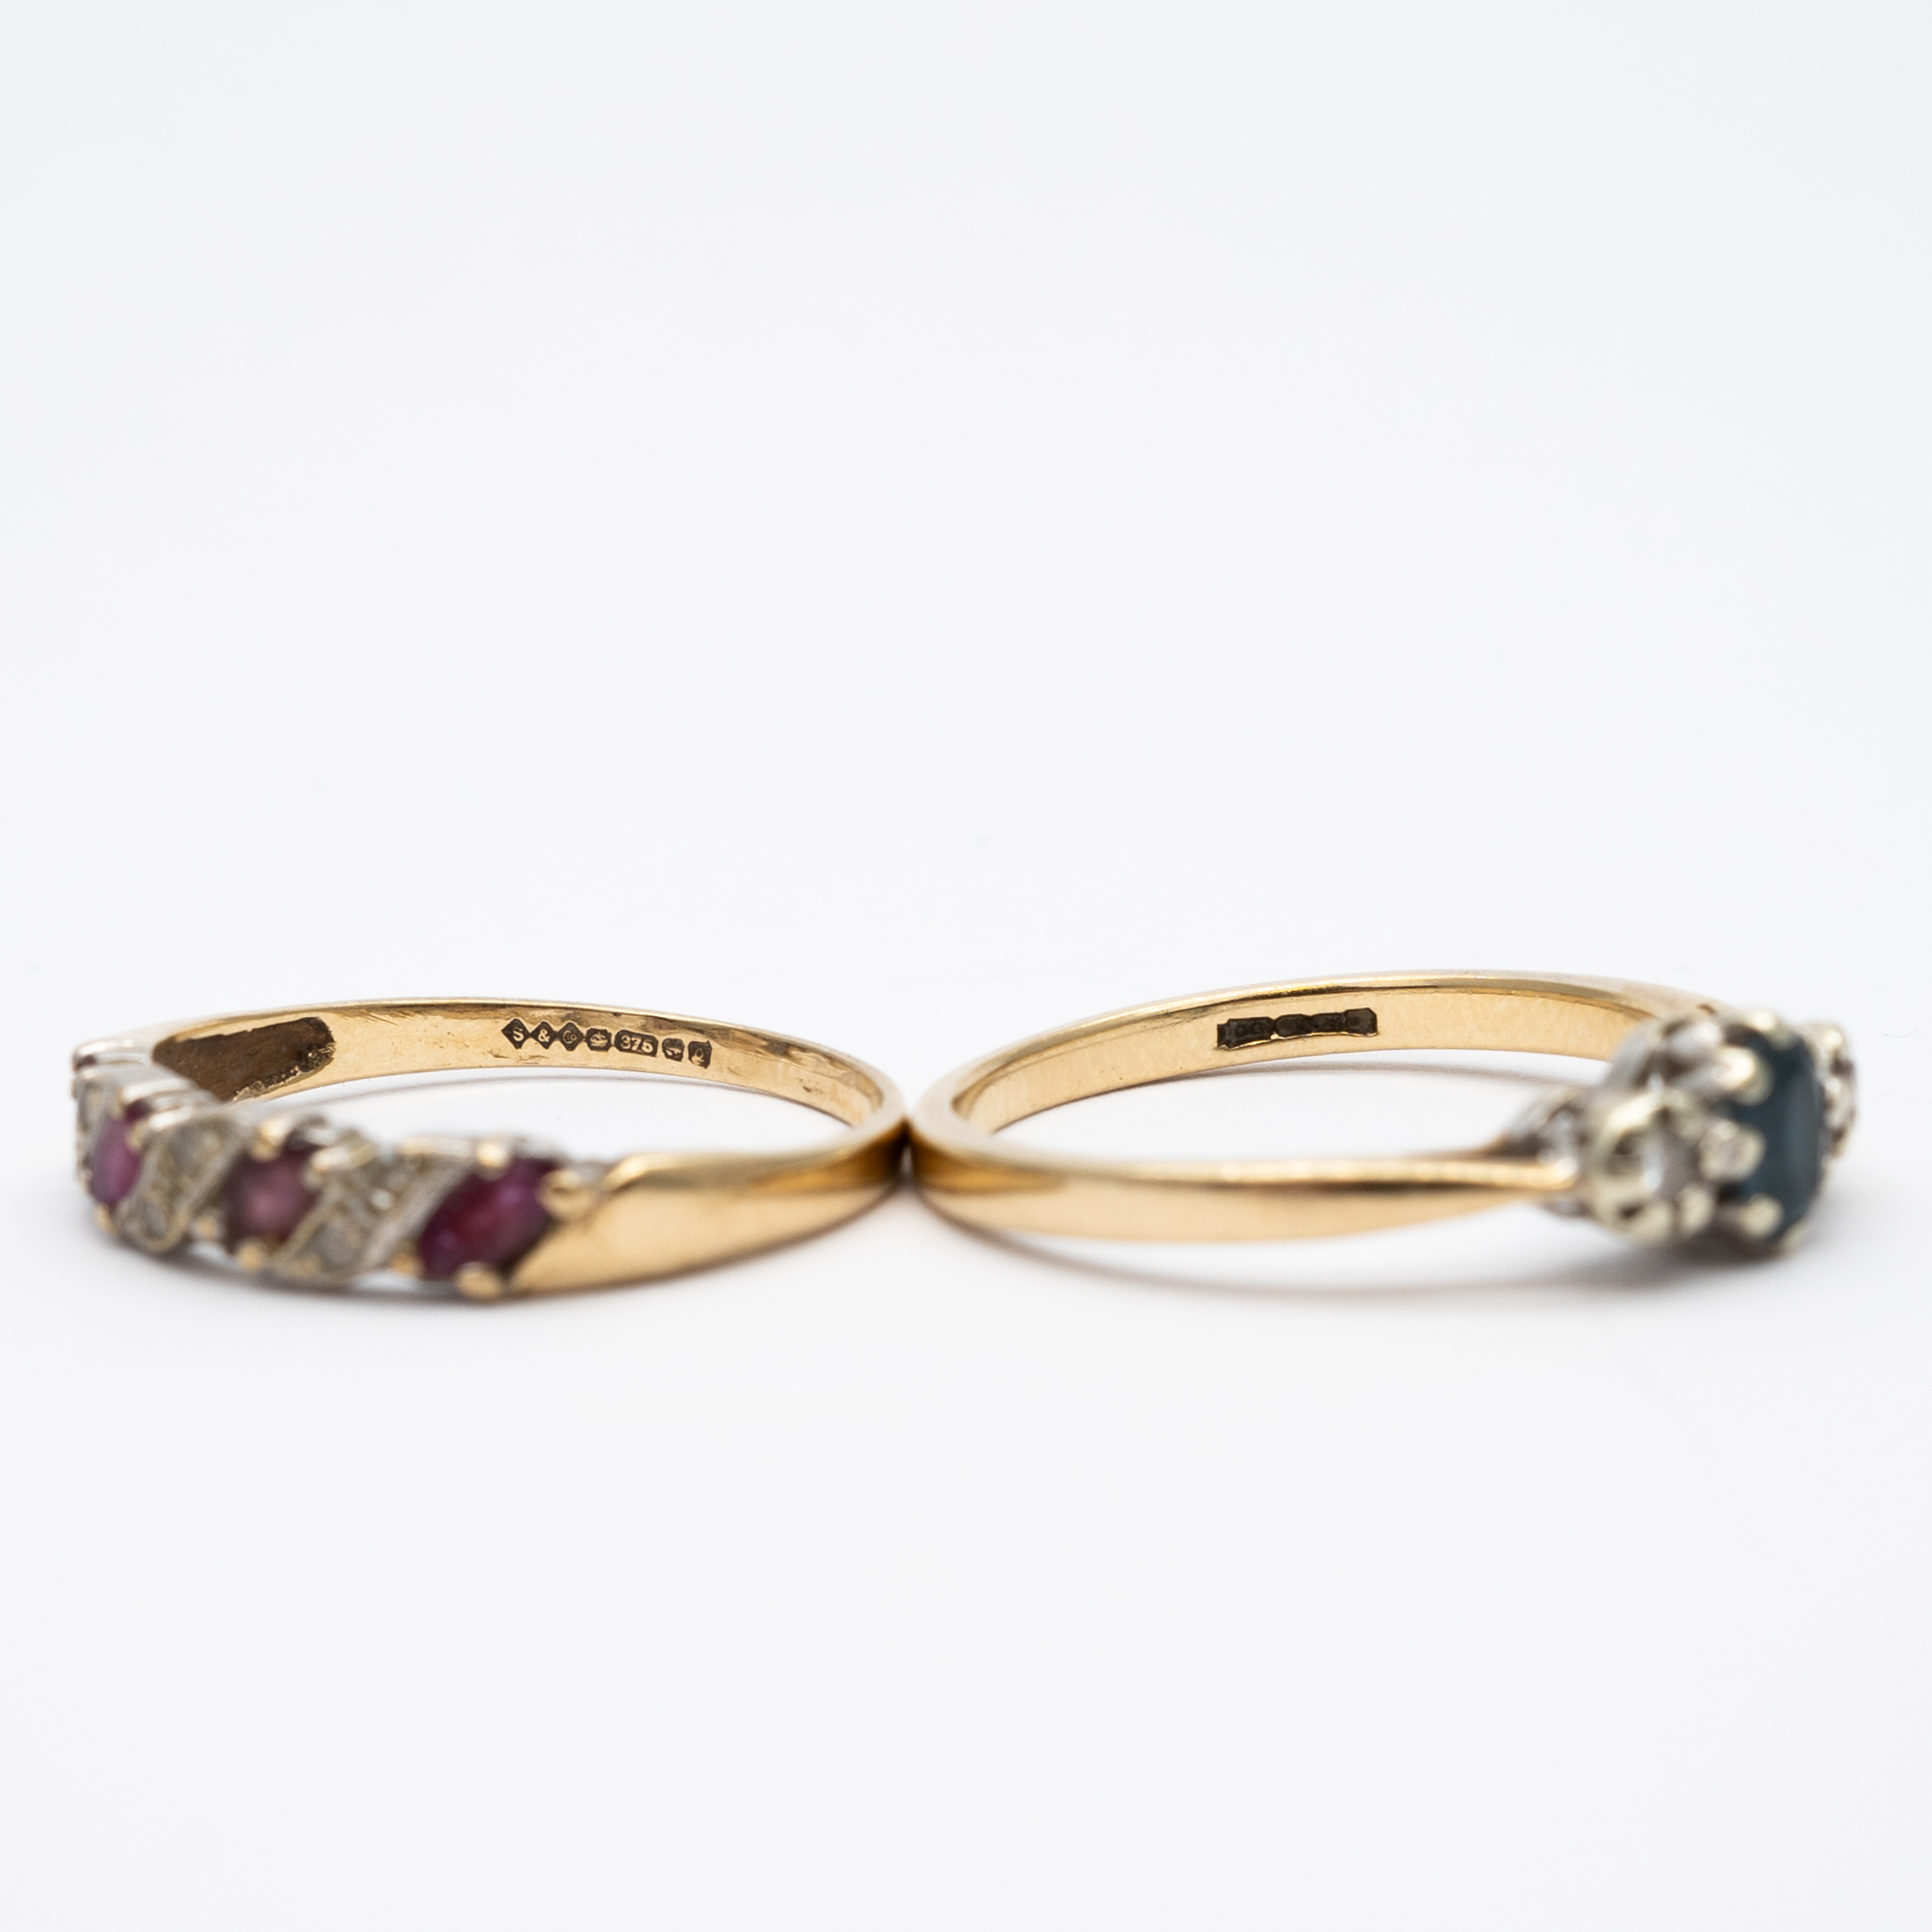 2x 9ct yellow gold dress rings - Image 2 of 4